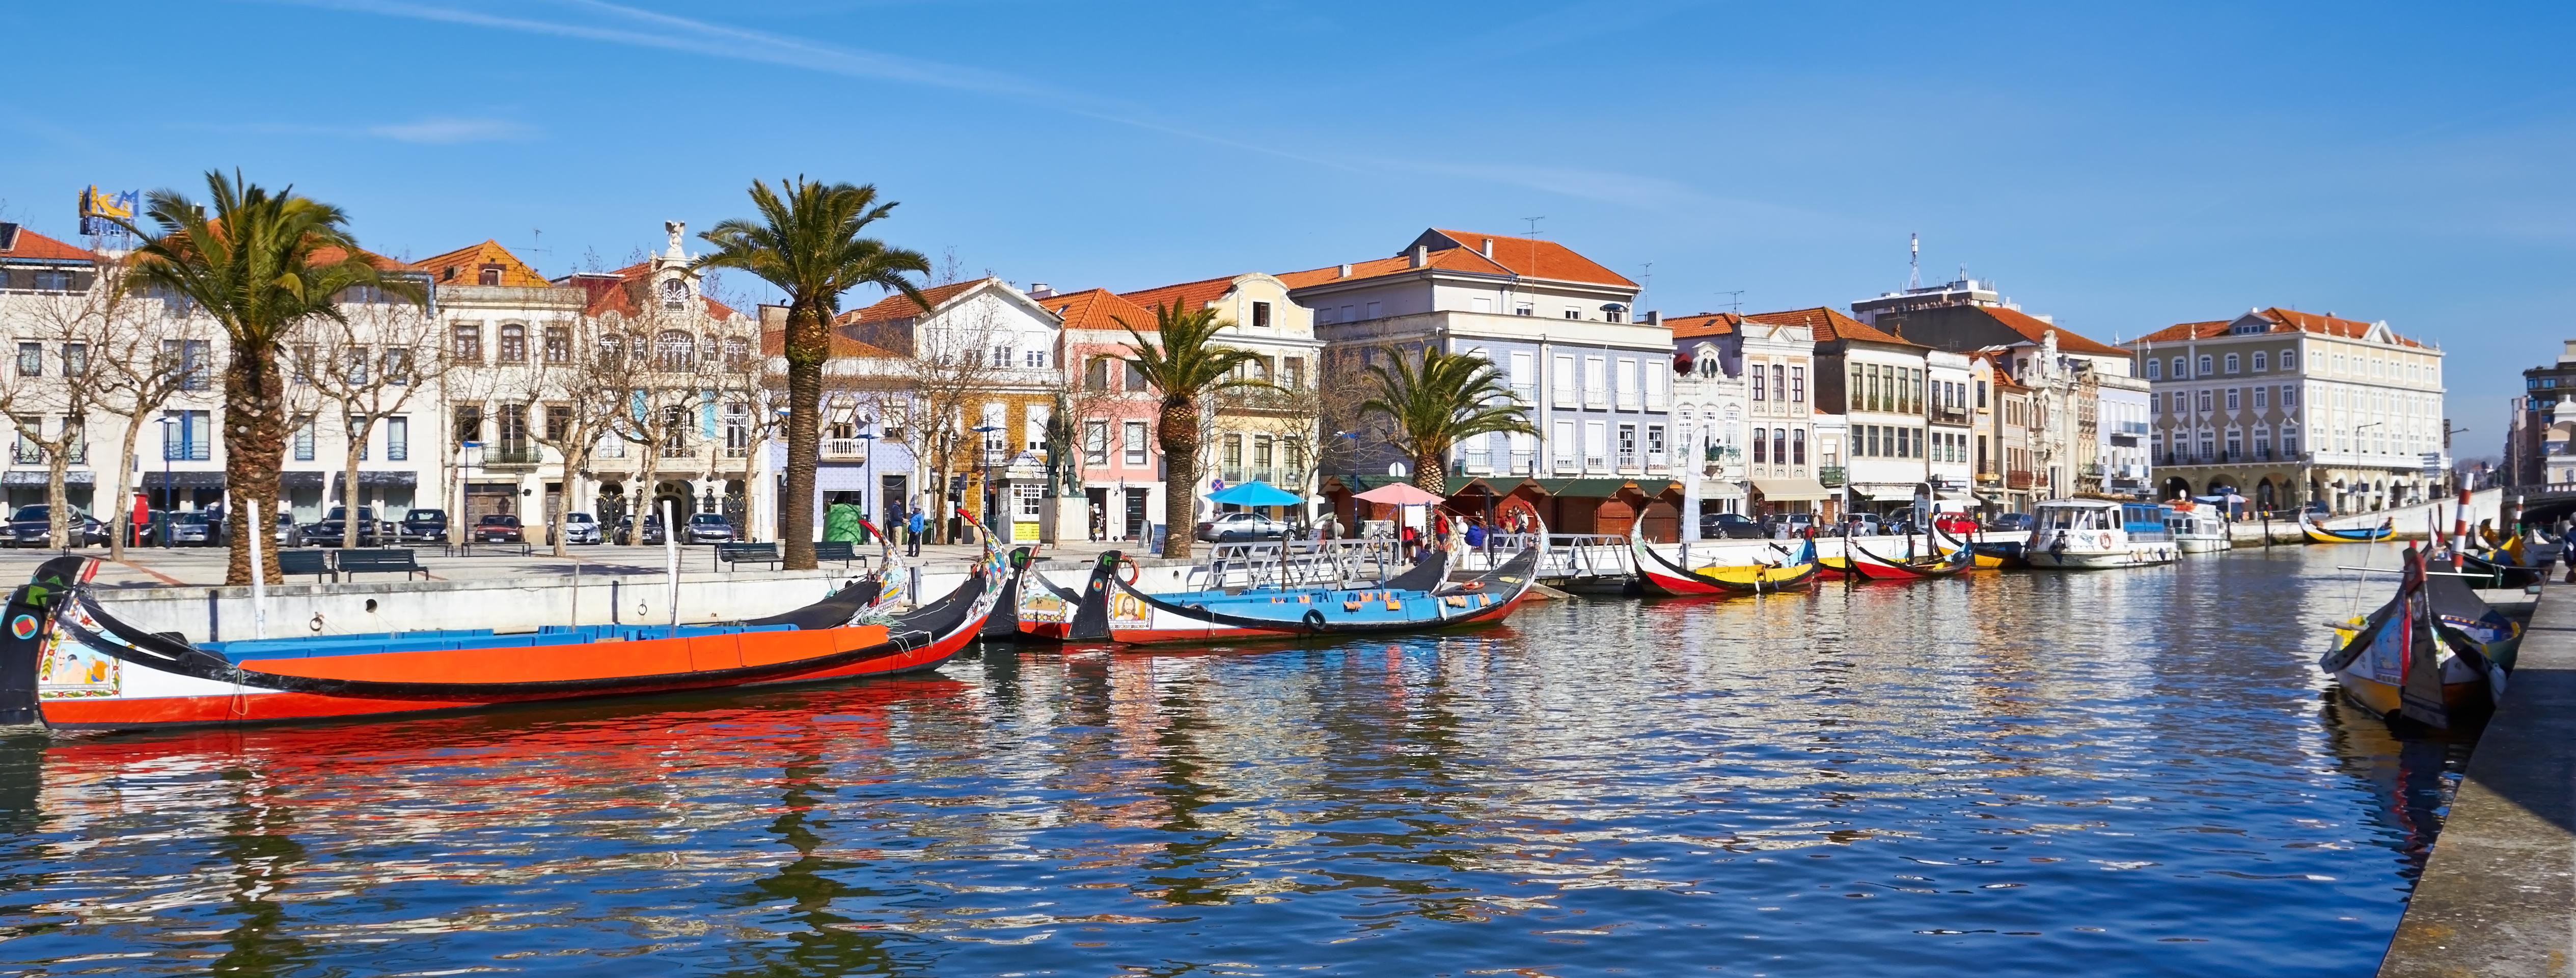 Half day excursion to Aveiro & boat trip - in French - From Porto